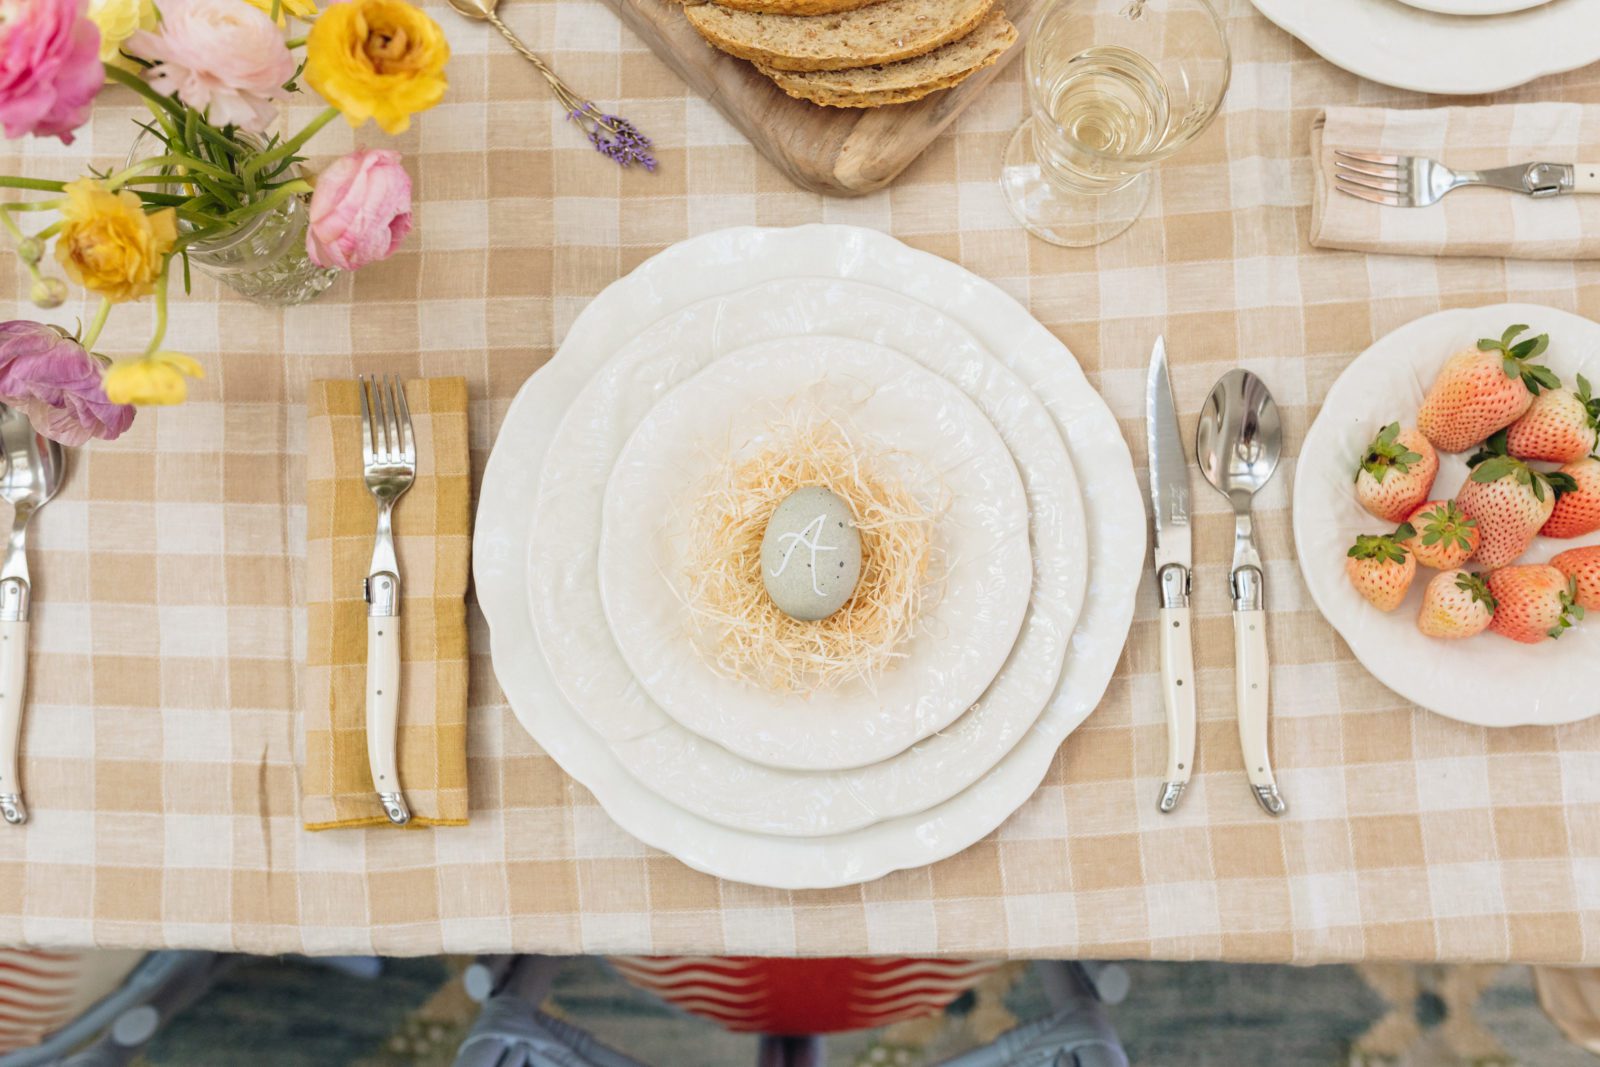 Top down view of a spring tabletop setting: charger, plate, fork, knife, spoon. On the plate is a handmade nest with a blue egg serving as a table setting.